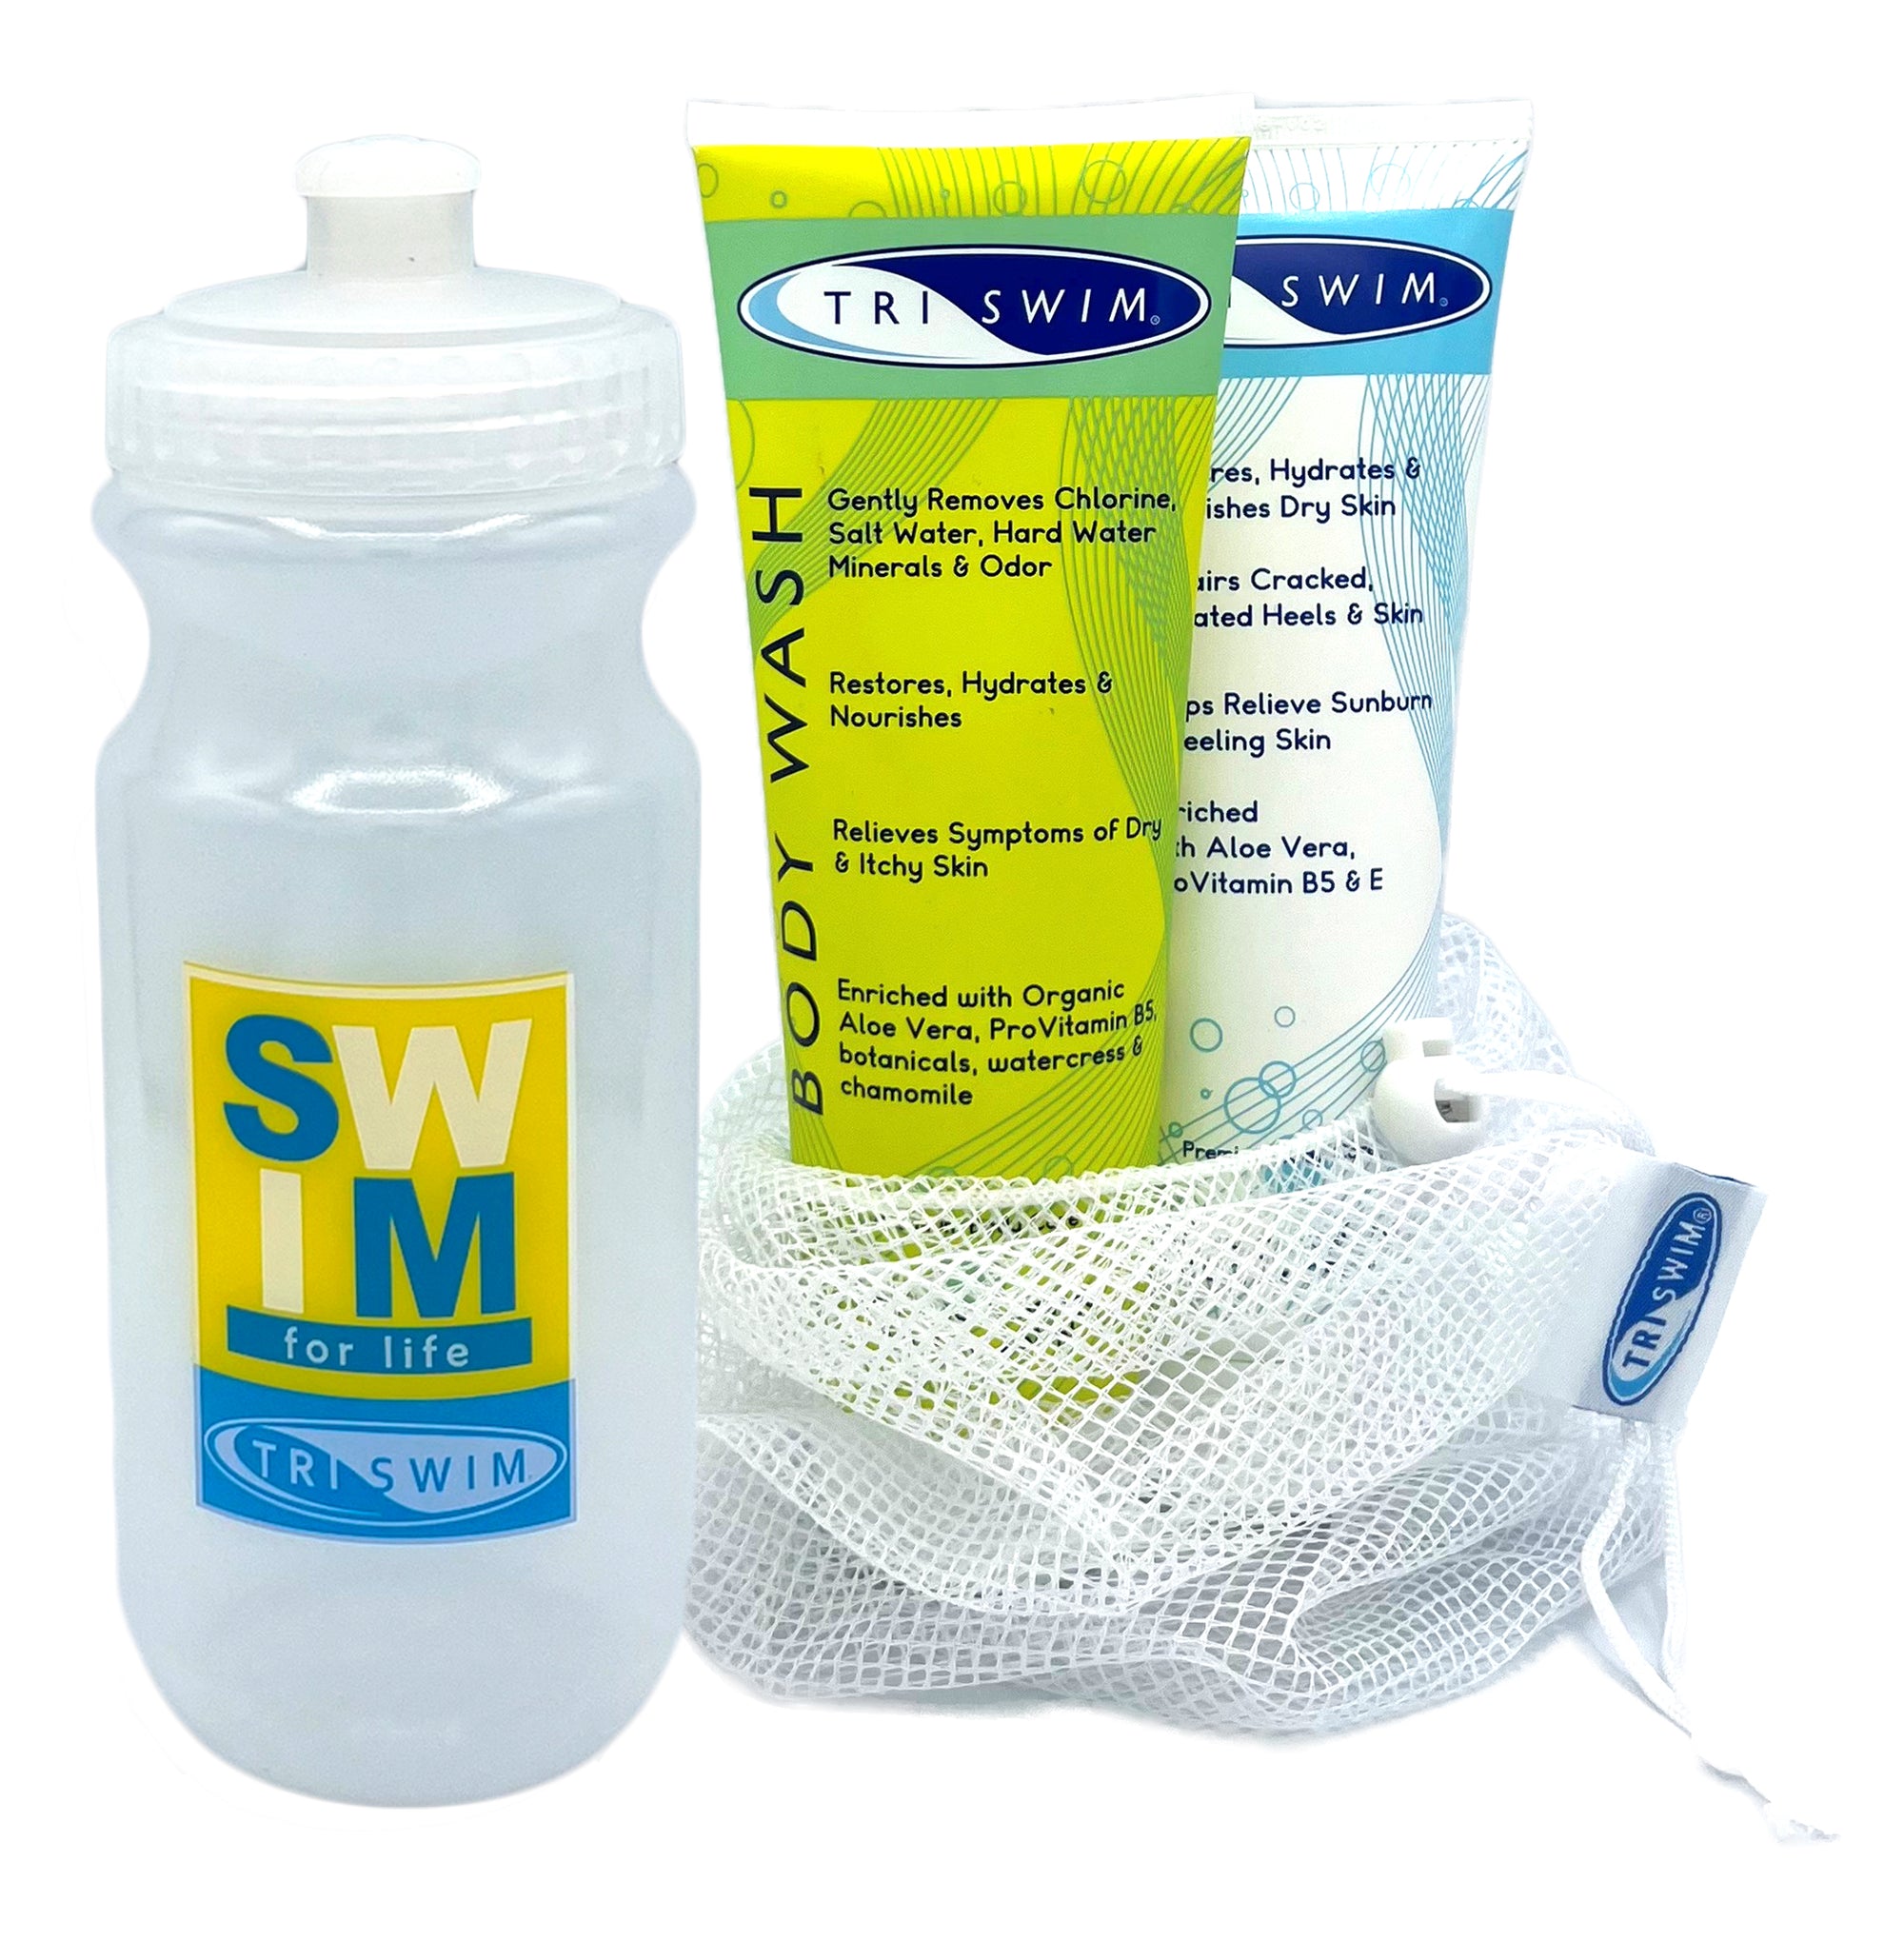 TRISWIM Body Wash/Lotion Gift Set with Water Bottle